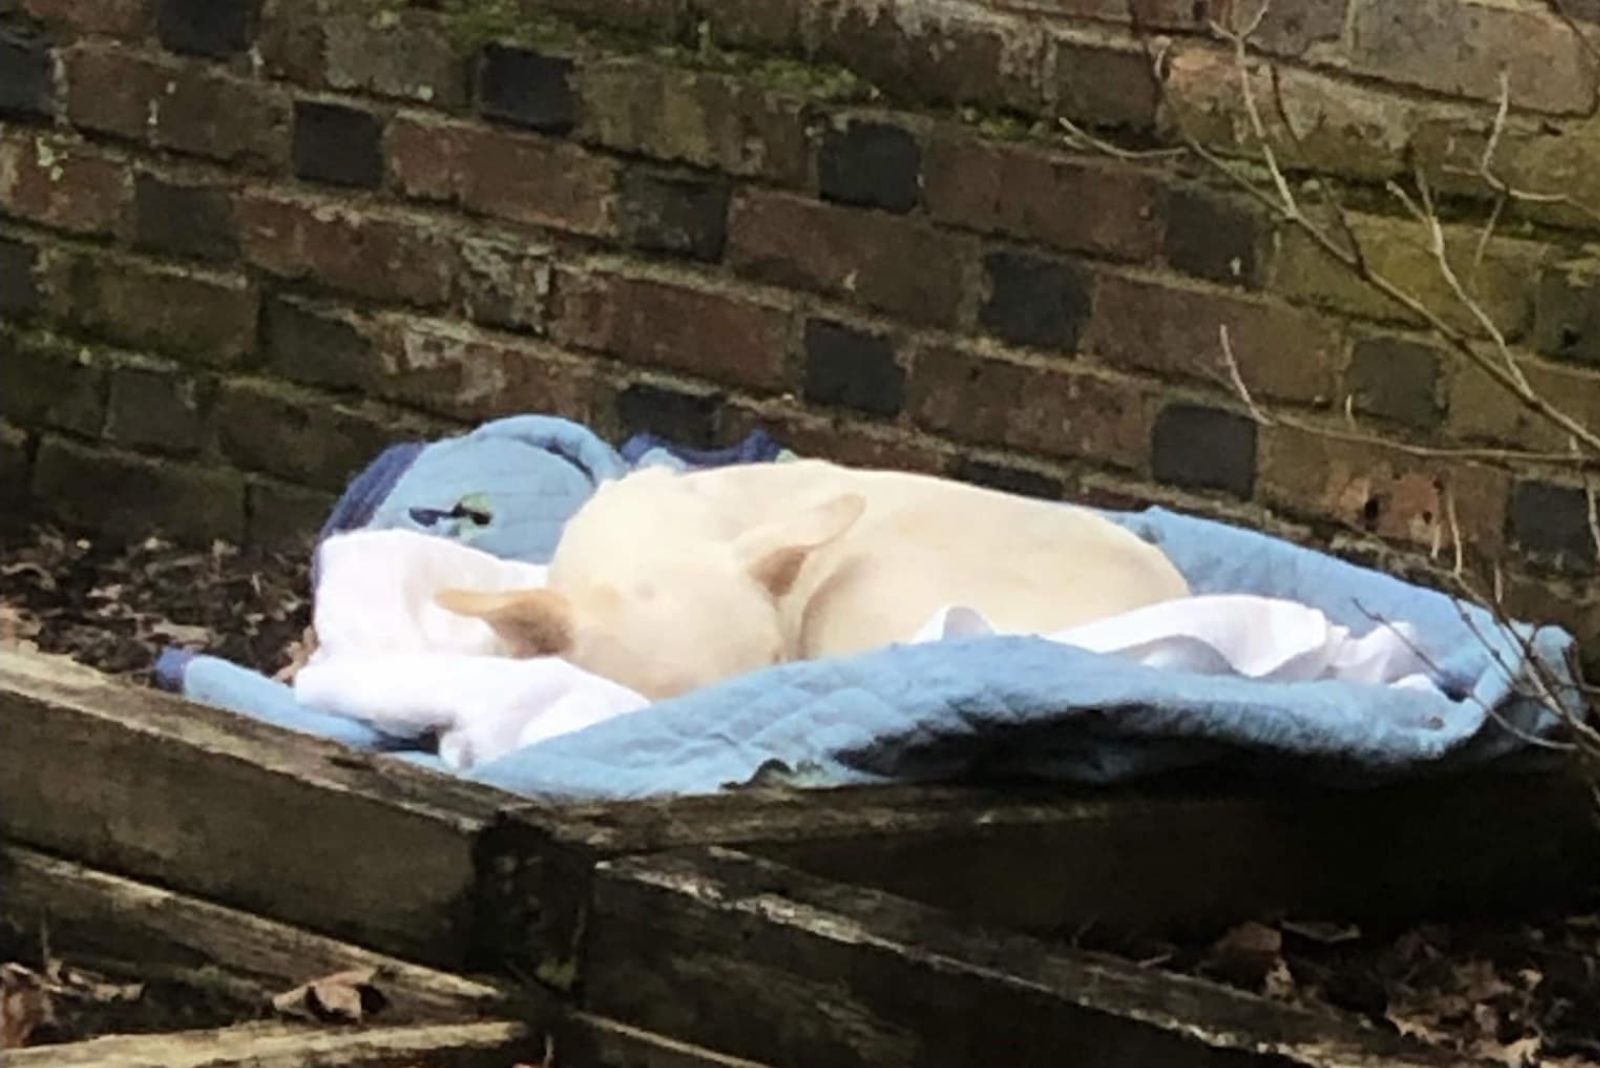 the white dog left in the flower bed is sleeping